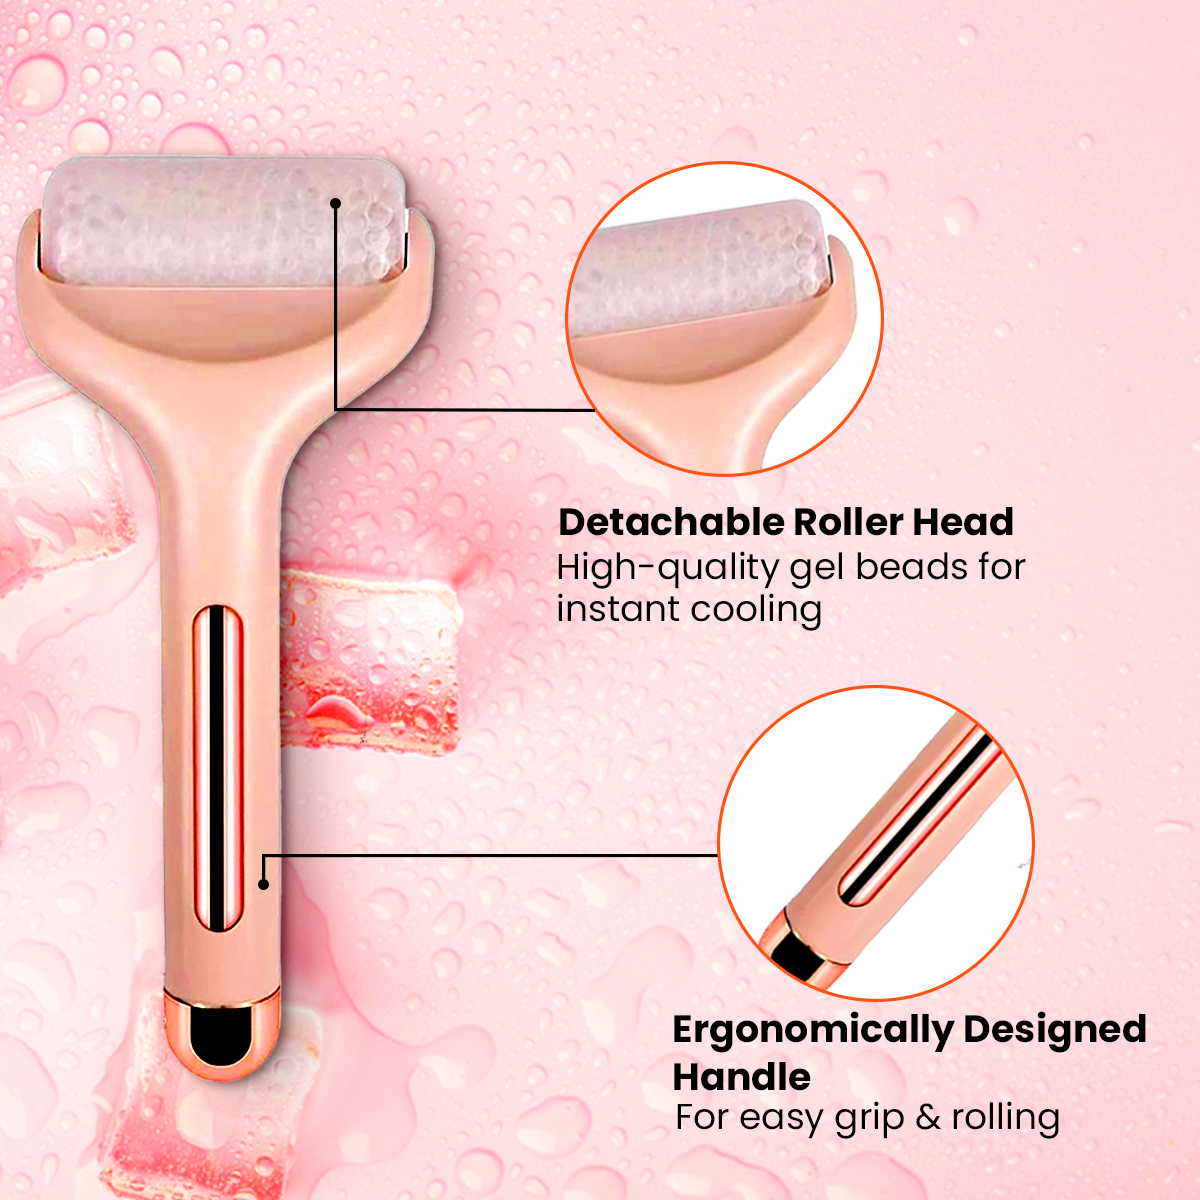 Ice Roller for Glowing Skin: Face Massager for Puffy Eyes